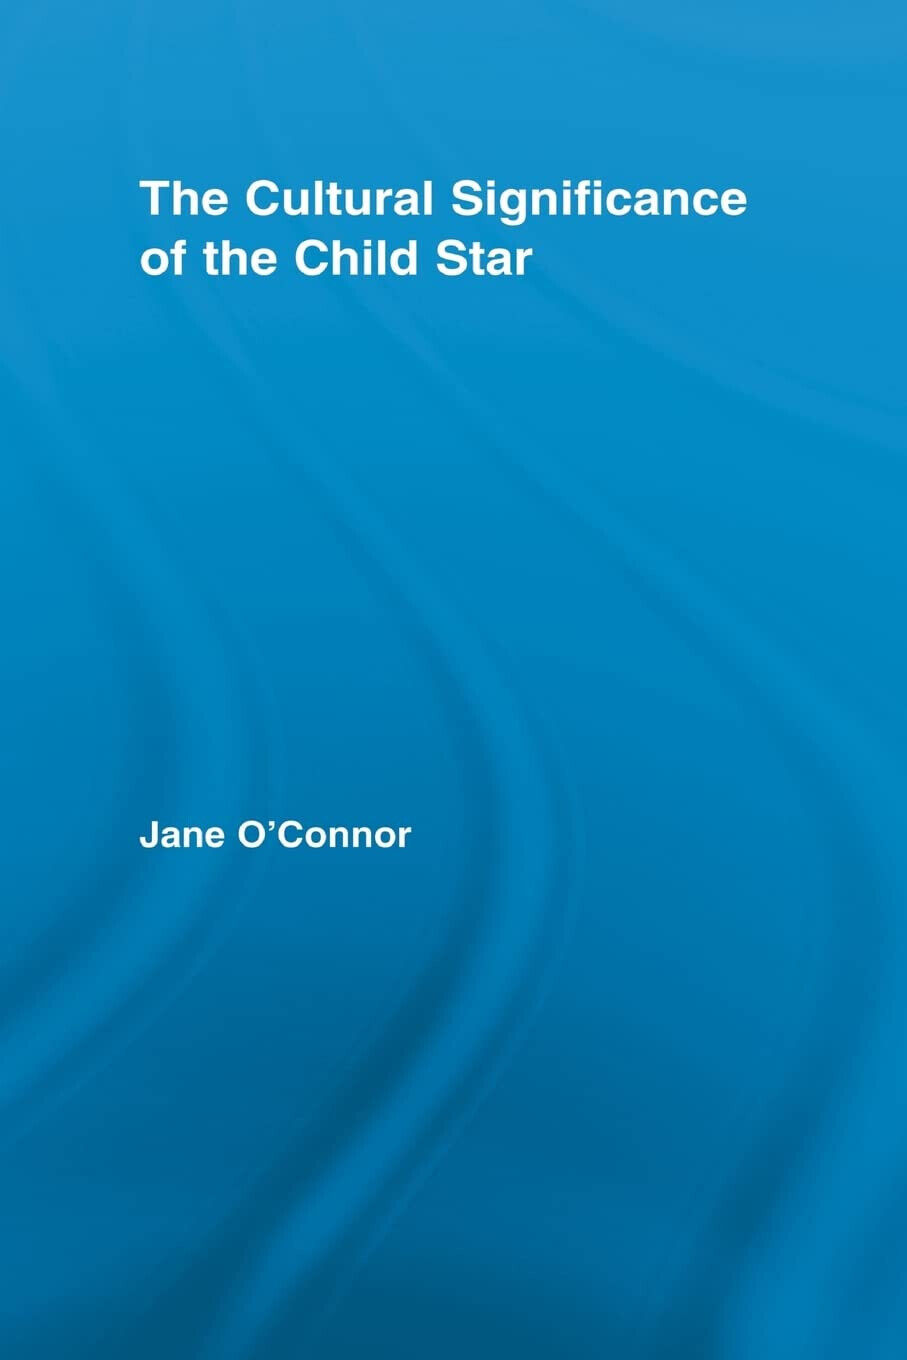 The Cultural Significance of the Child Star - Jane Catherine - 2012 libro usato